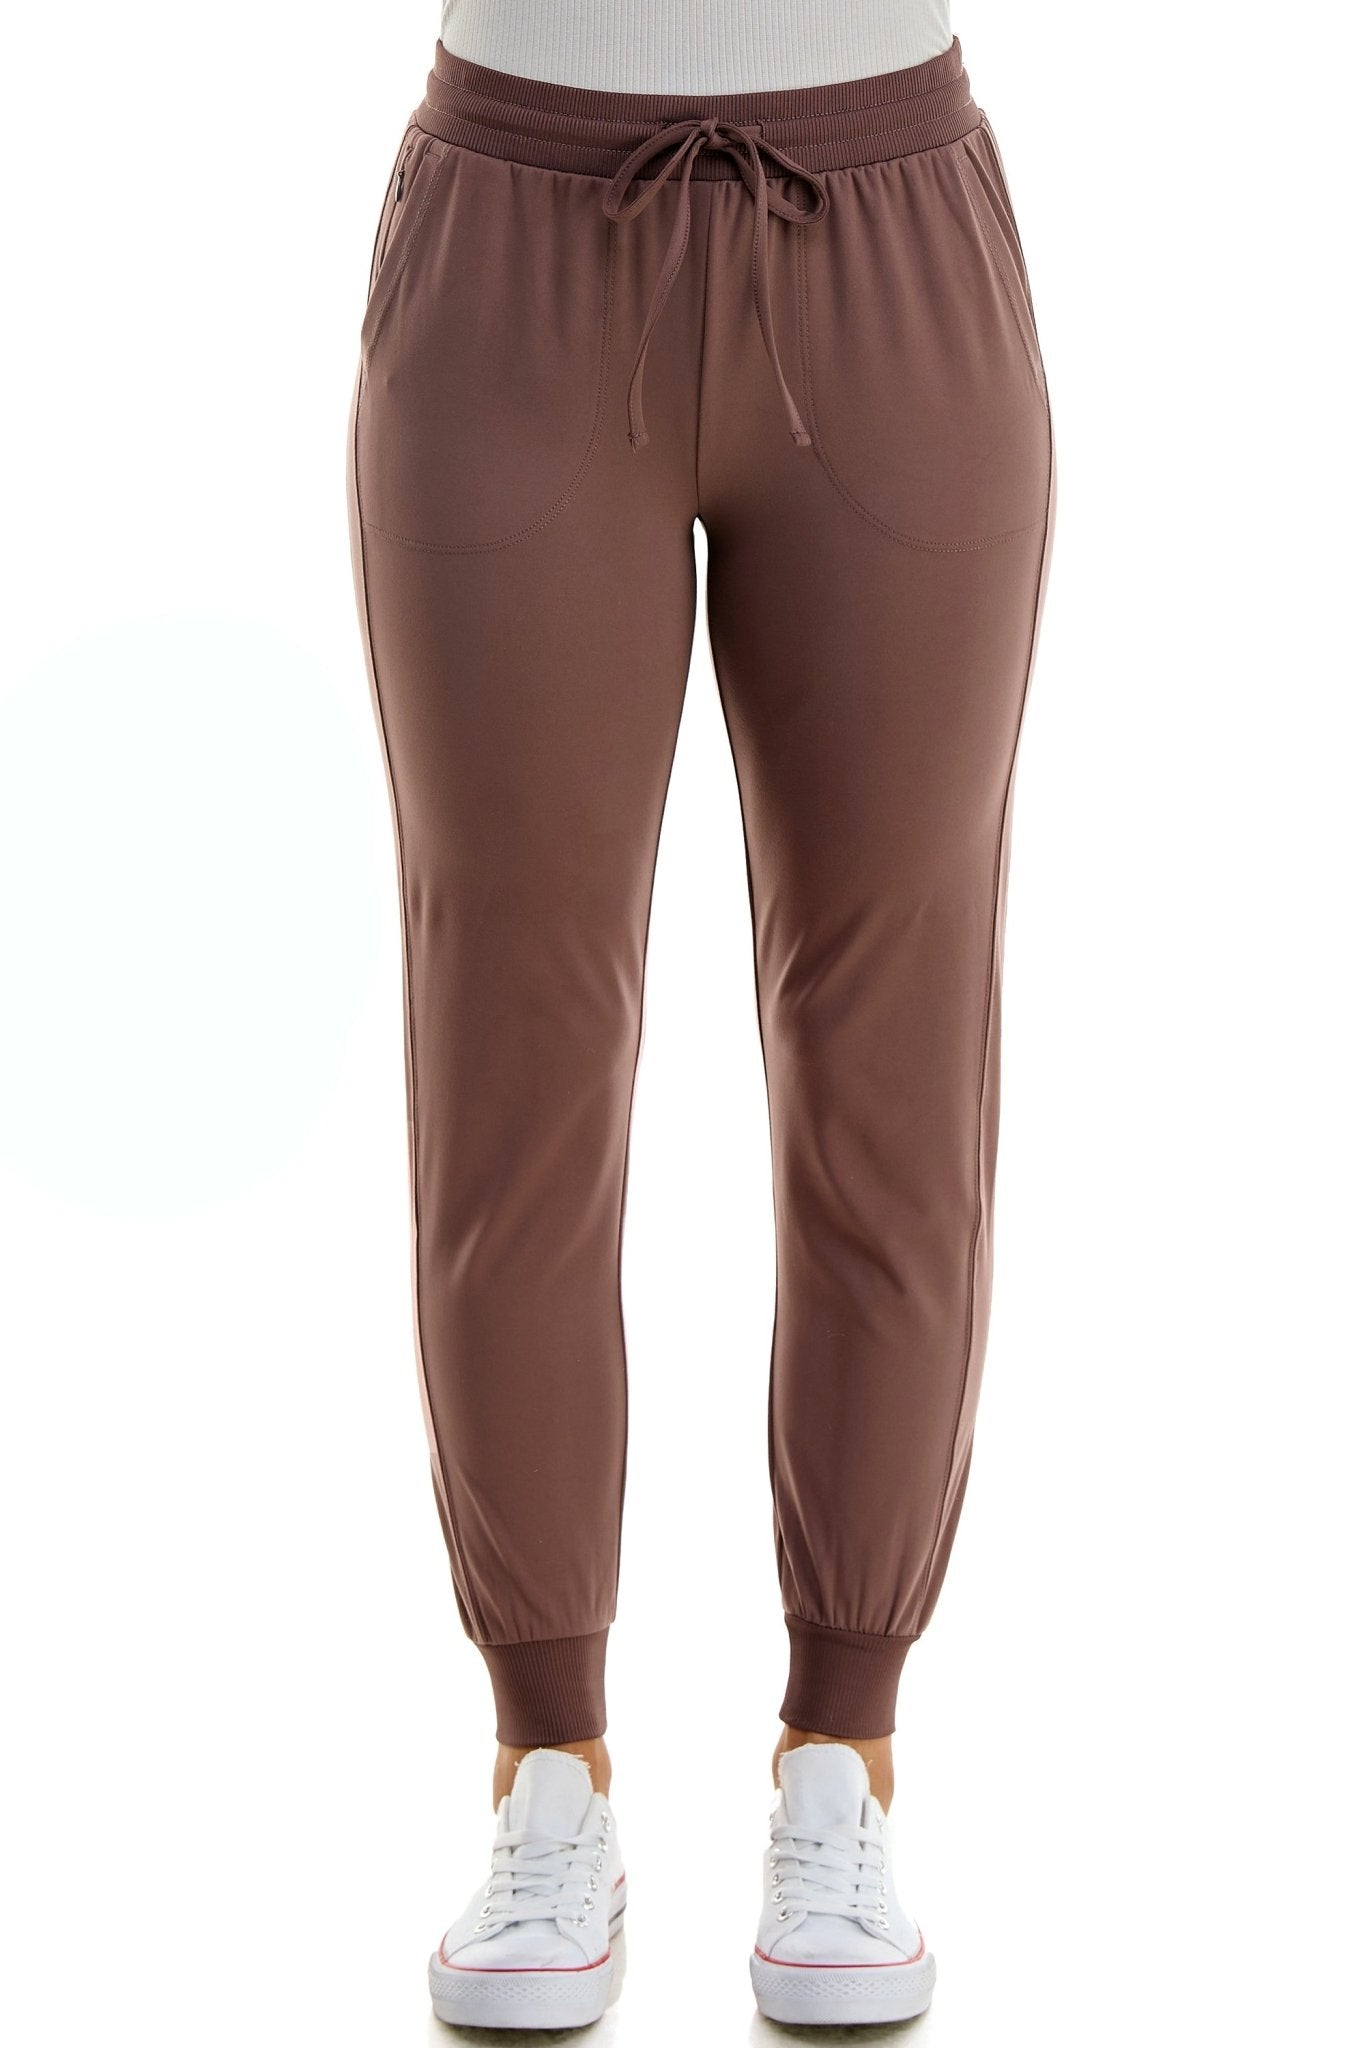 Zac & Rachel Women's Pull on Jogger Pant with Tie Front and Side Pockets - DressbarnPants